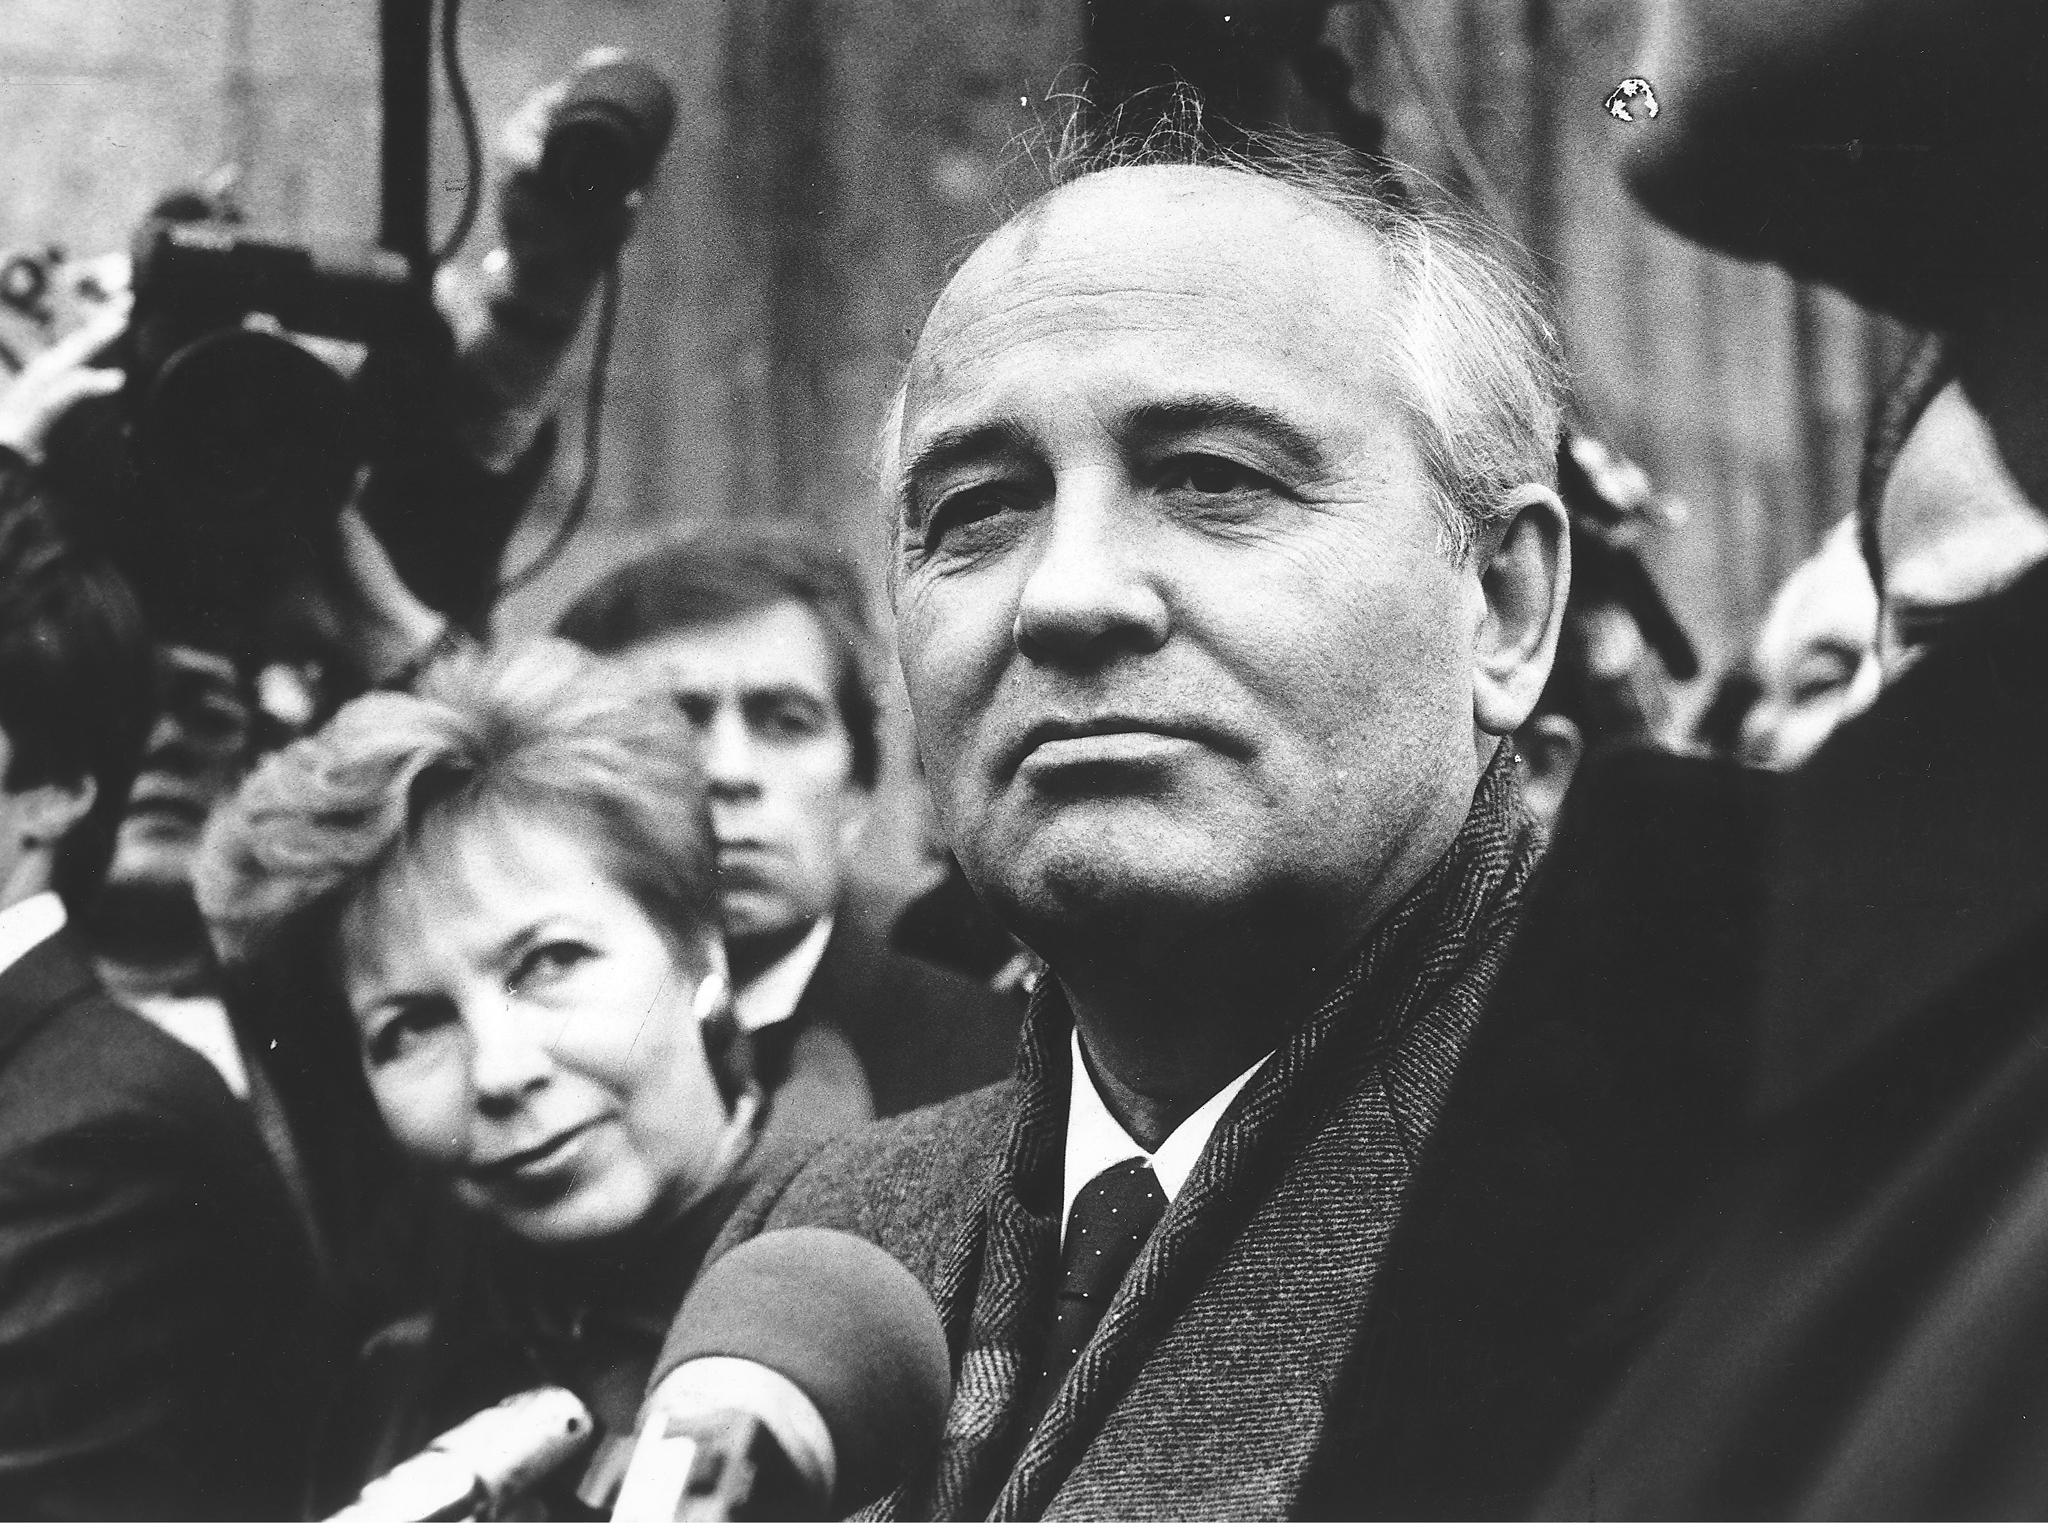 Is Putin finally ready to learn from Gorbachev? The Independent